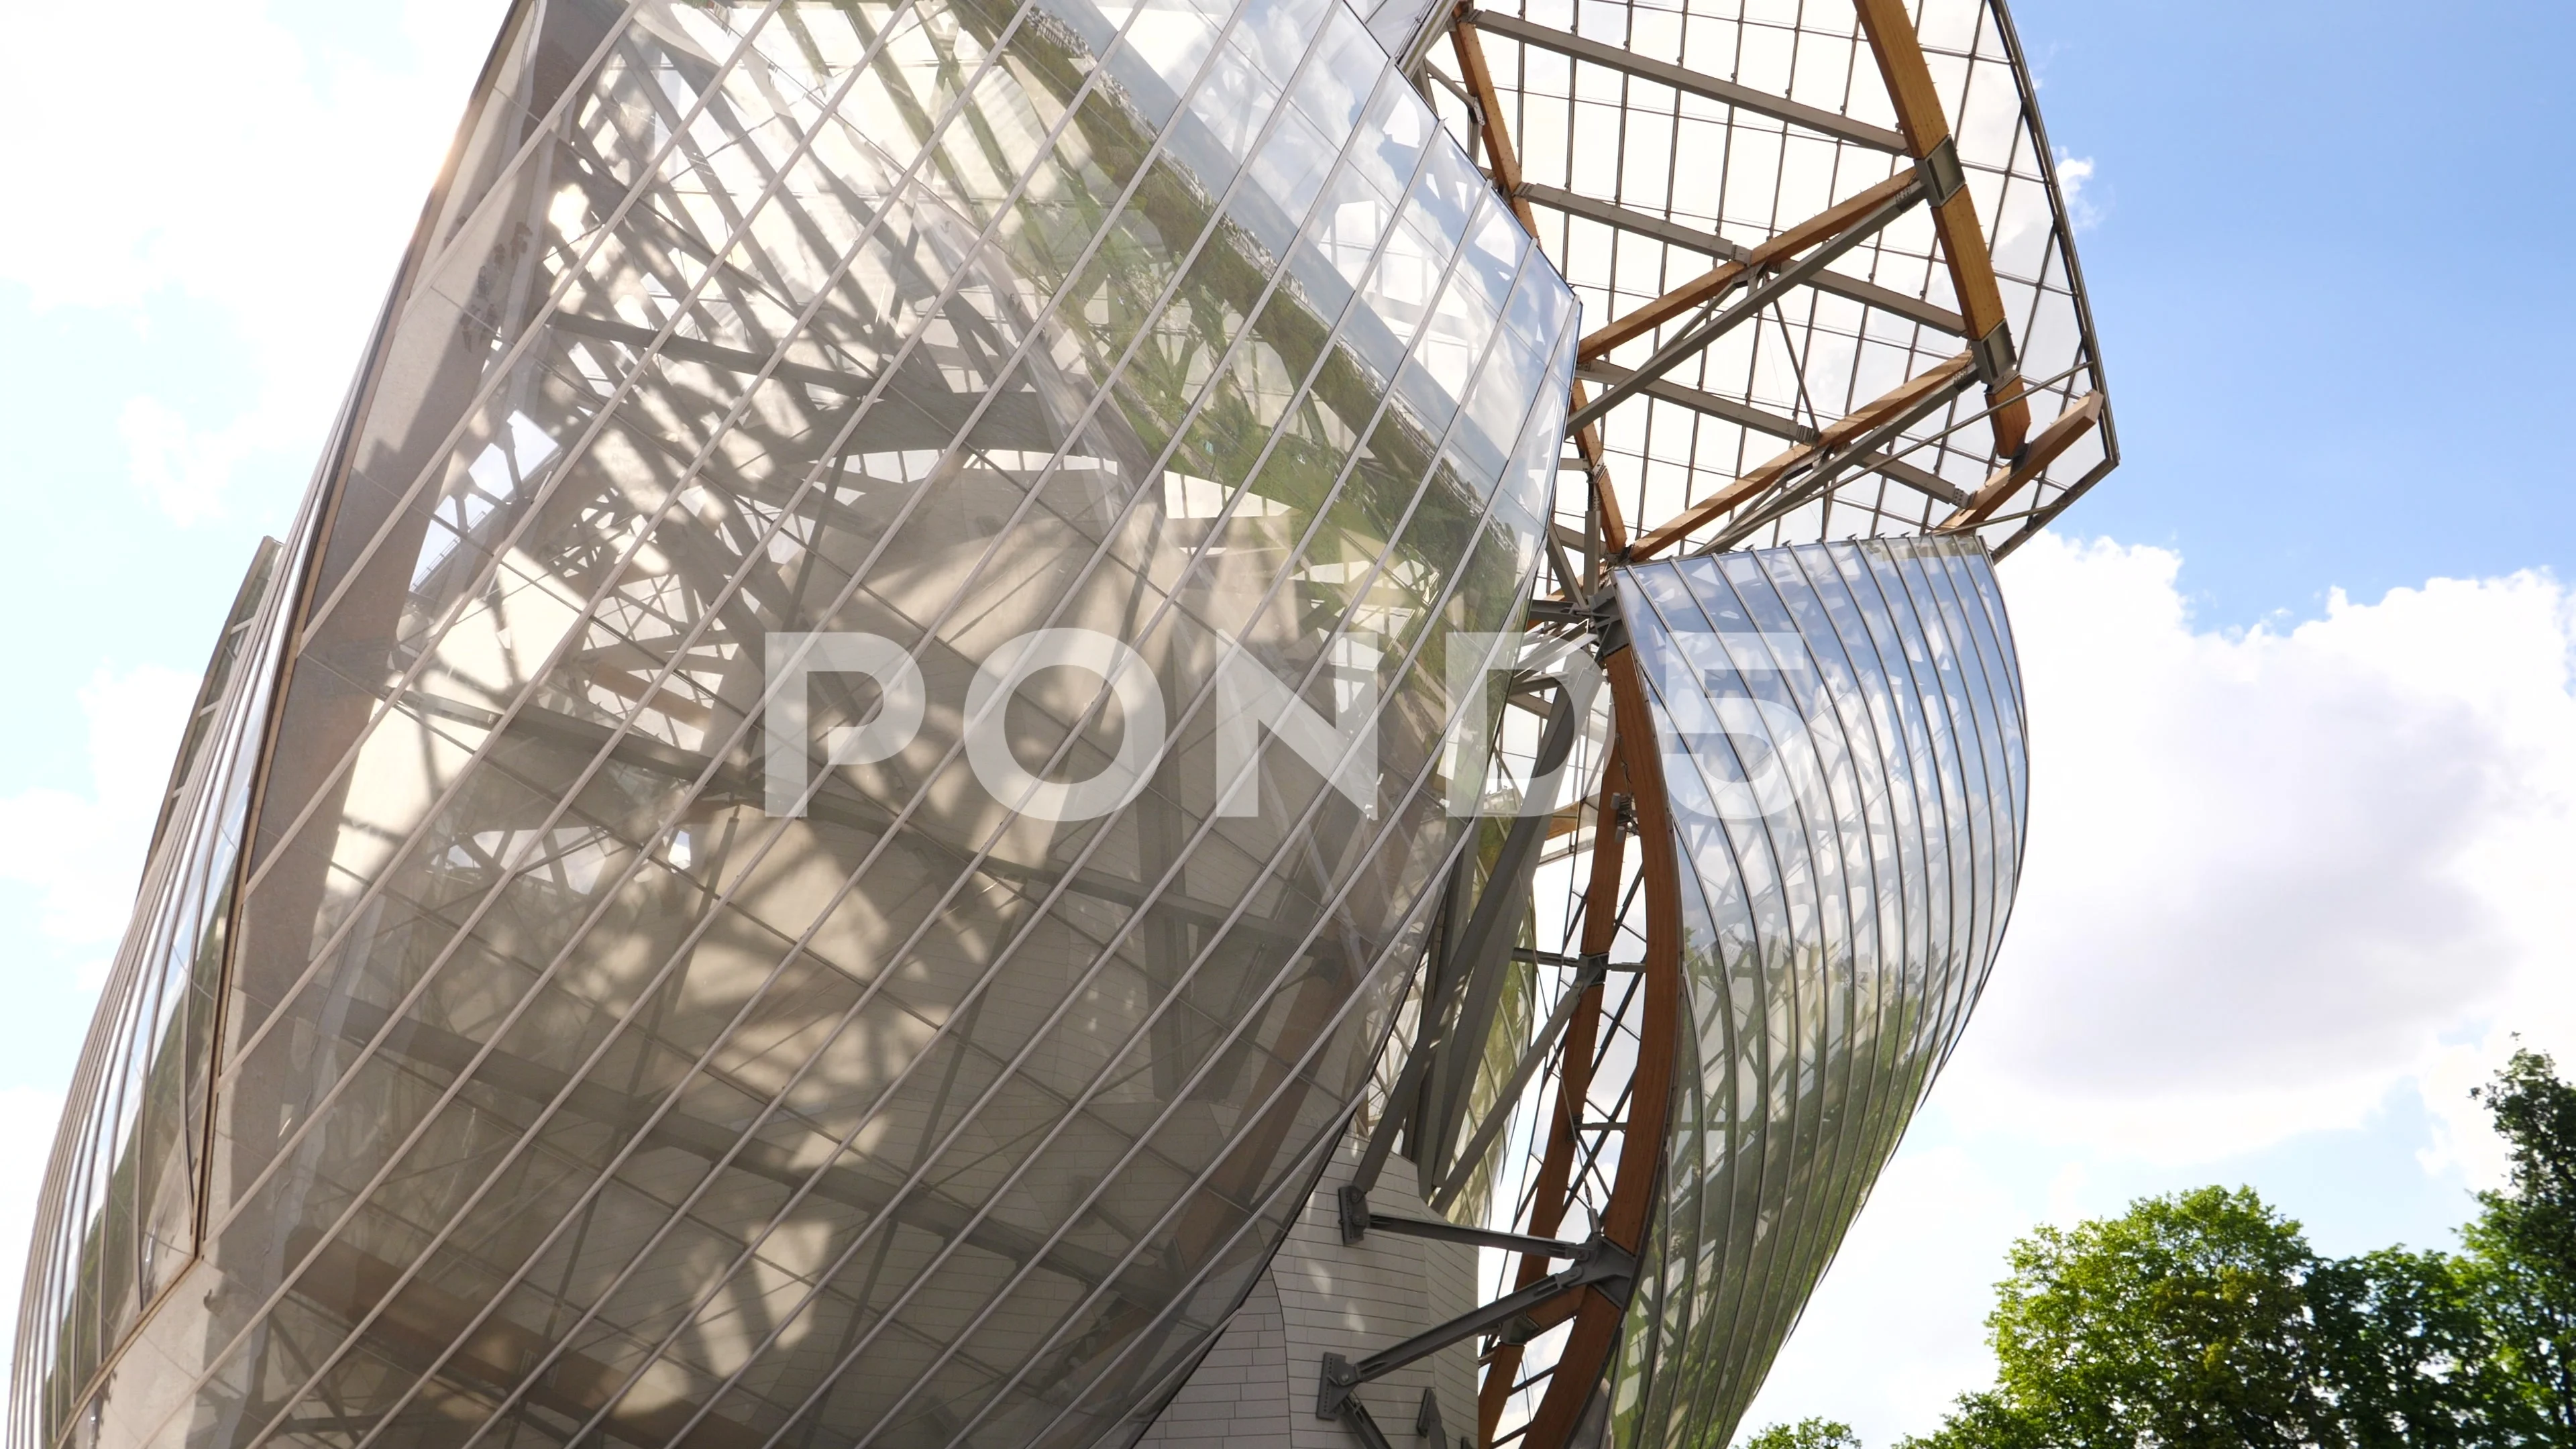 Louis Vuitton Foundation, private museum of modern art, architect